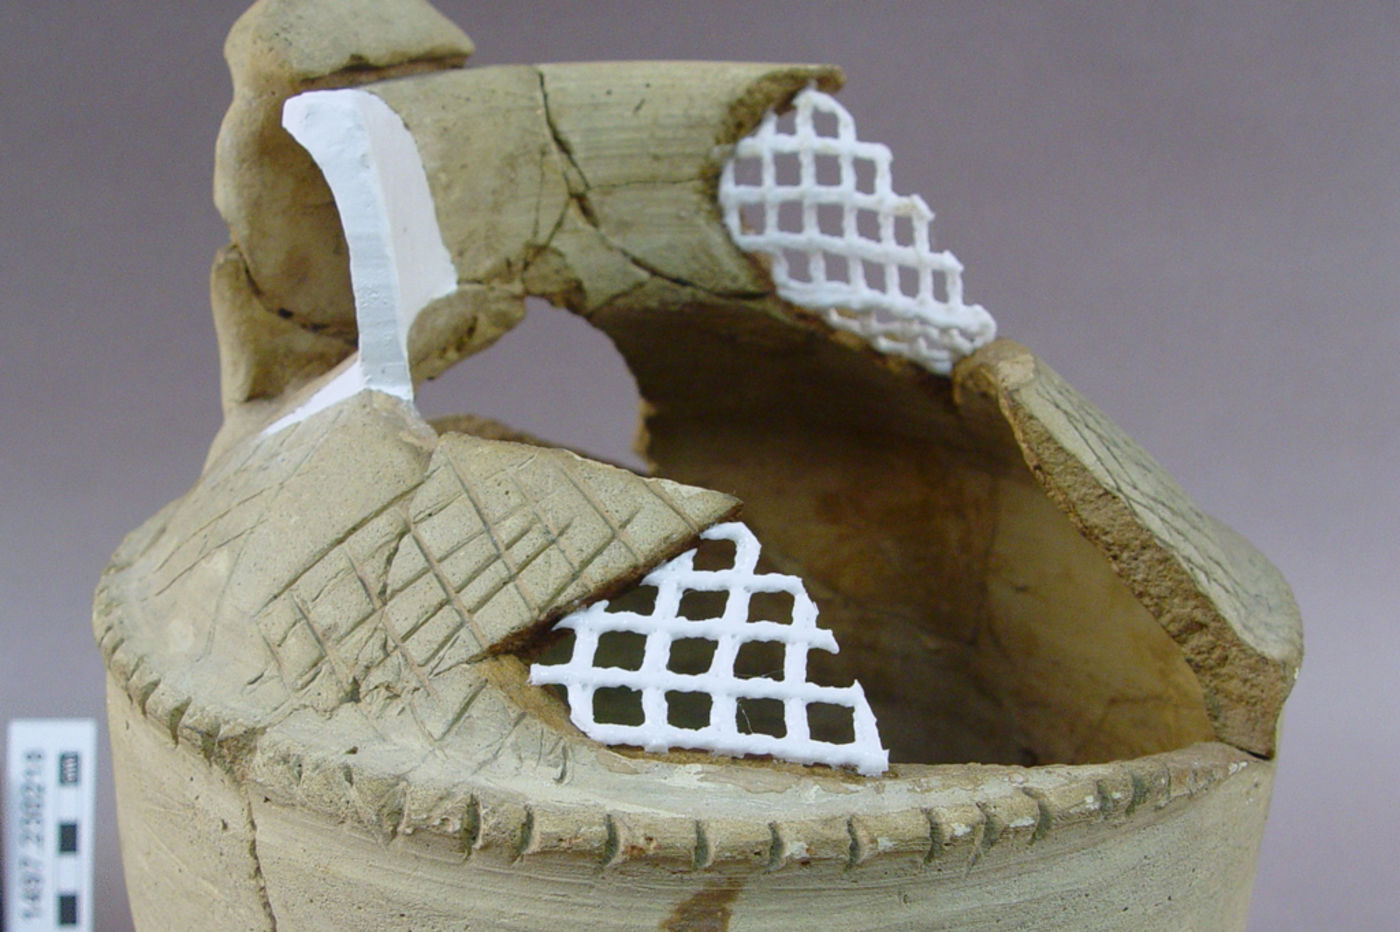 View of a piece of pottery undergoing conservation, with mesh supports visible. 